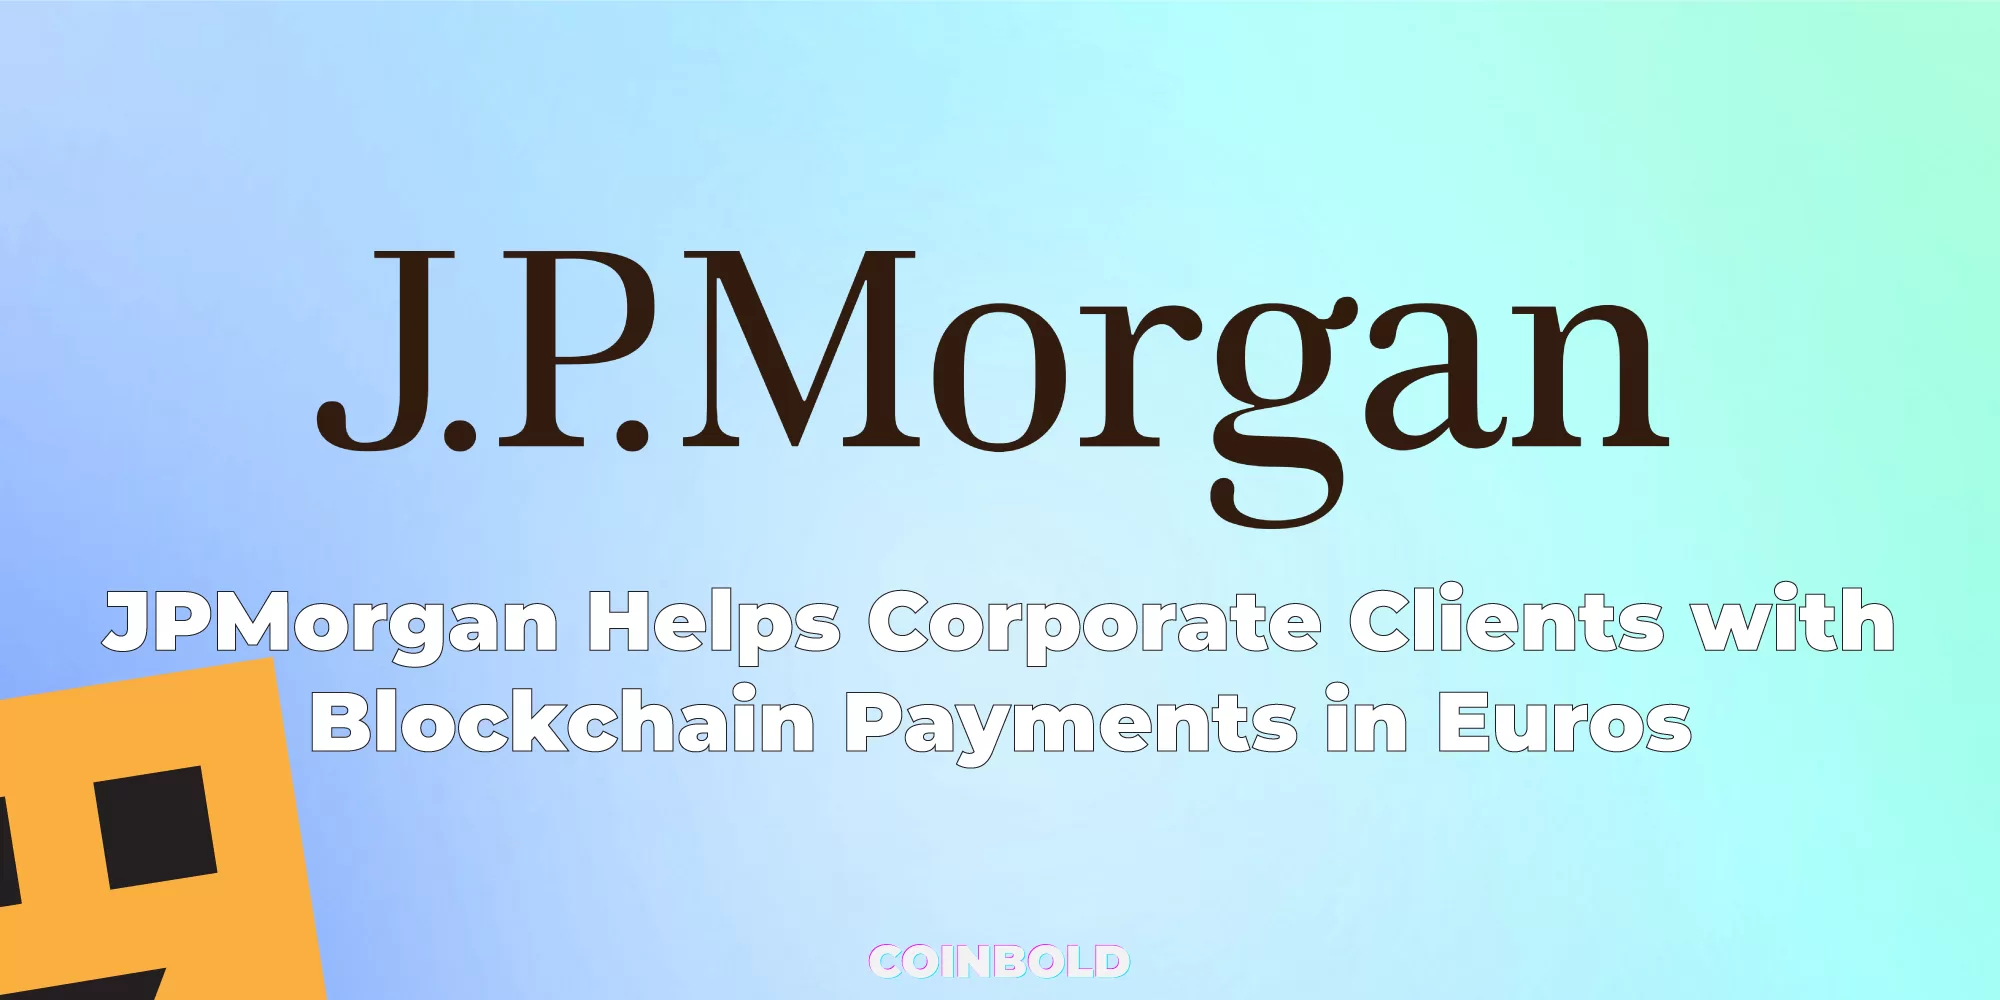 JPMorgan Helps Corporate Clients with Blockchain Payments in Euros